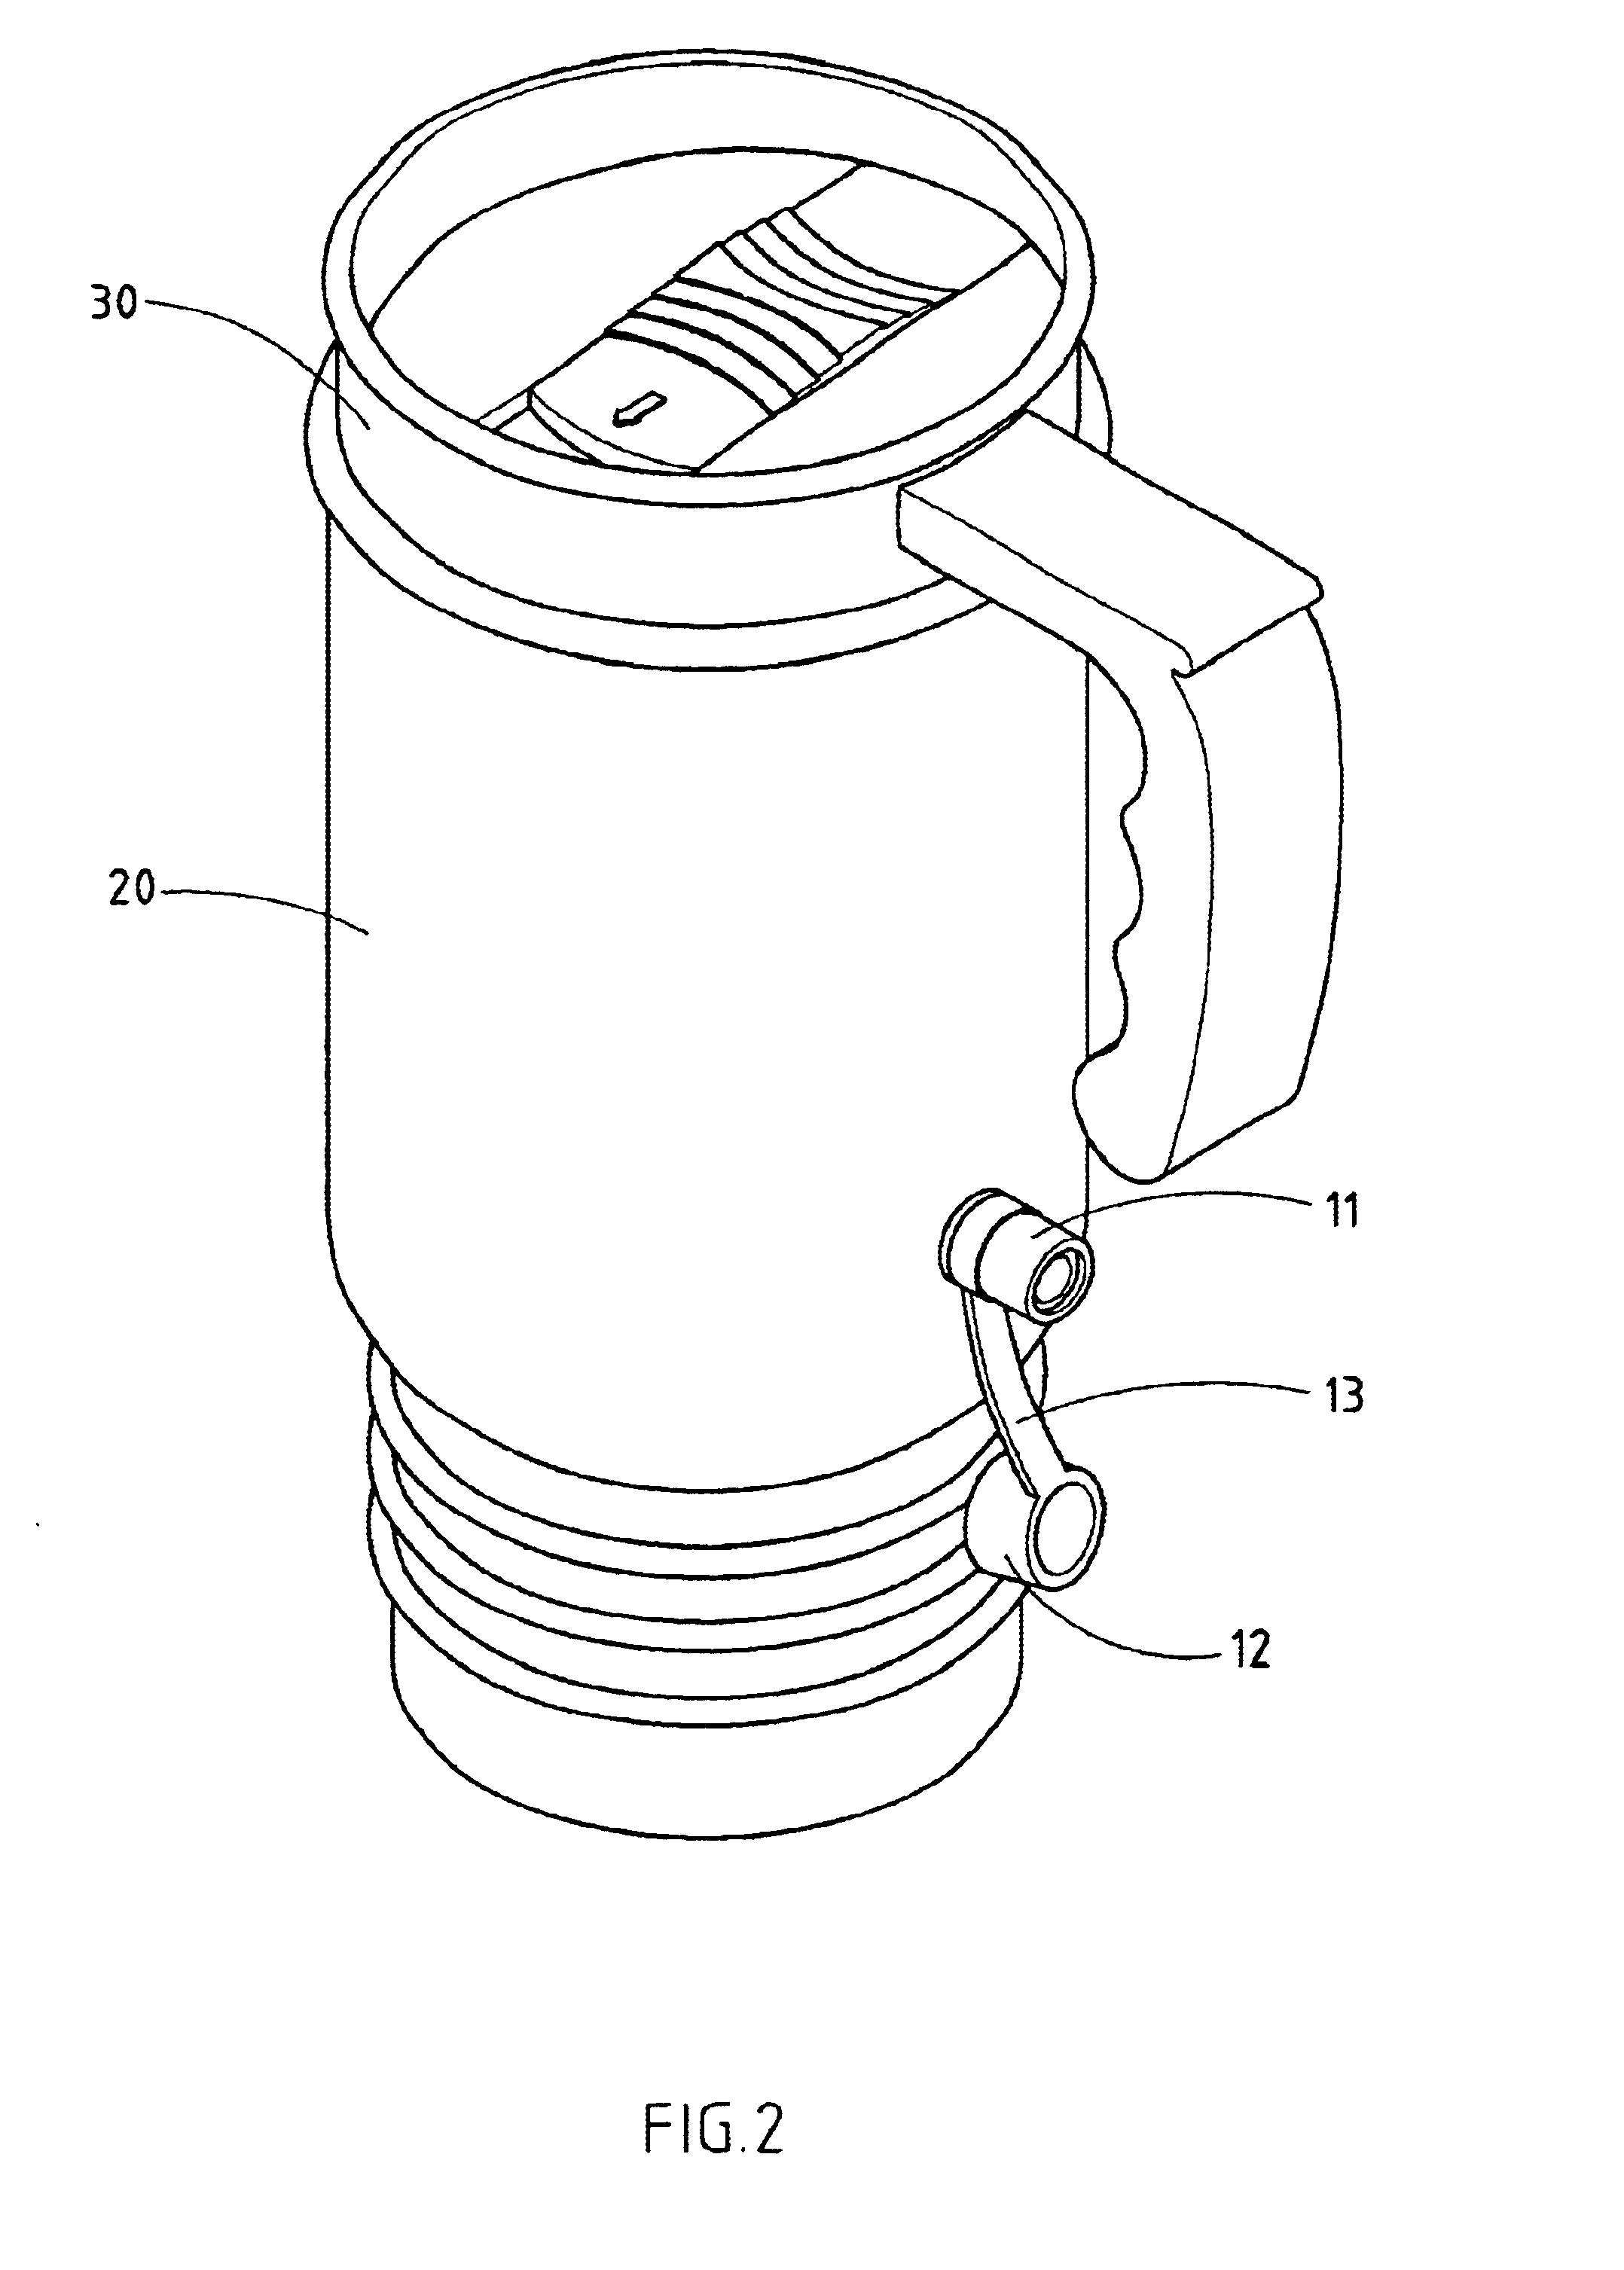 Built-in electric heating structure for a travel mug or thermos bottle